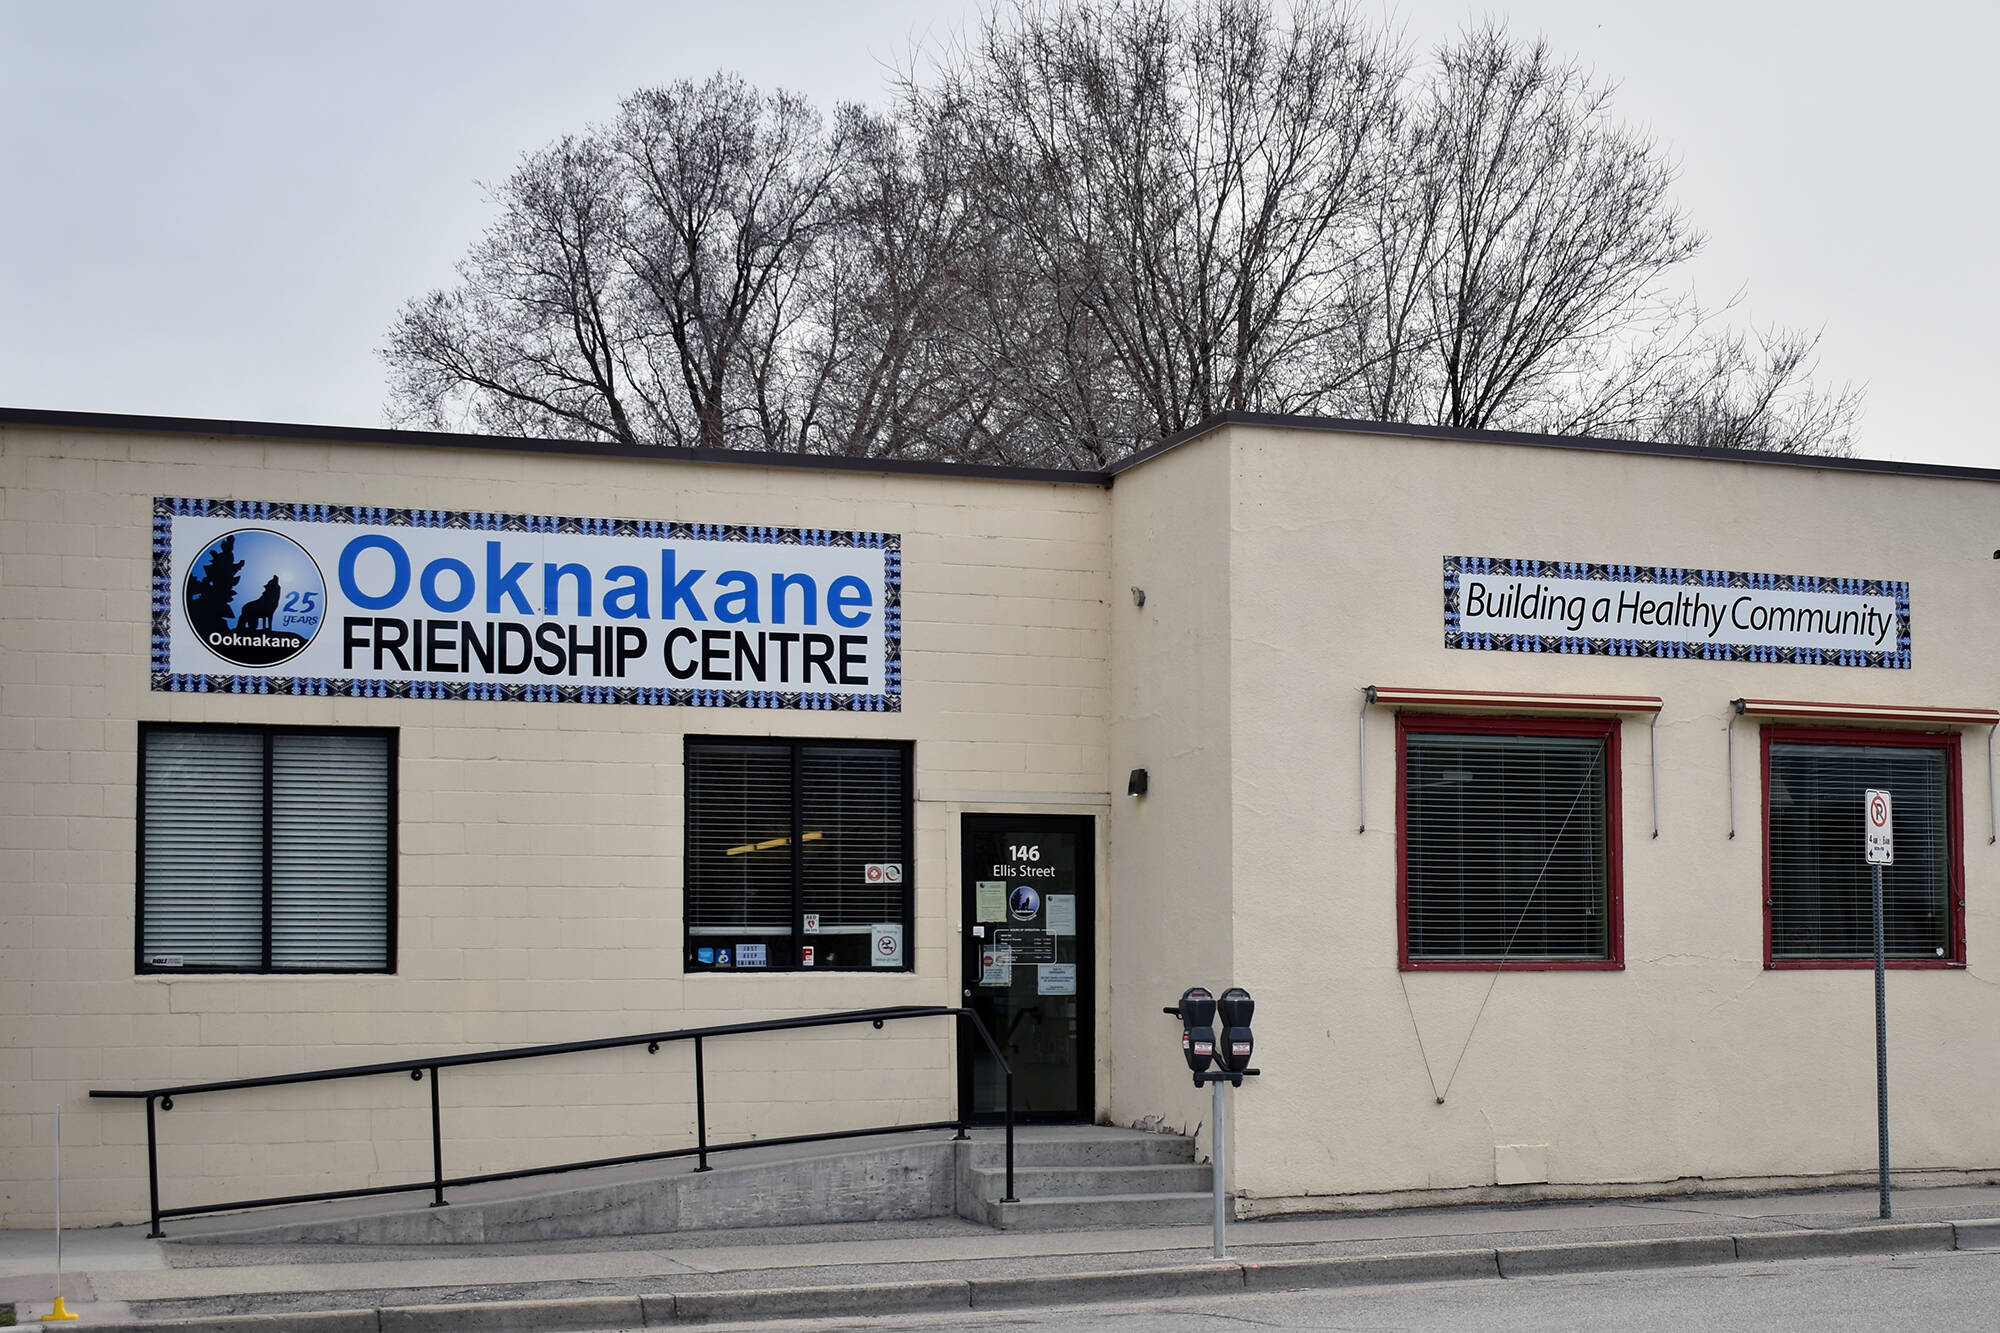 The Ooknakane Friendship Centre in Penticton (Western News File)